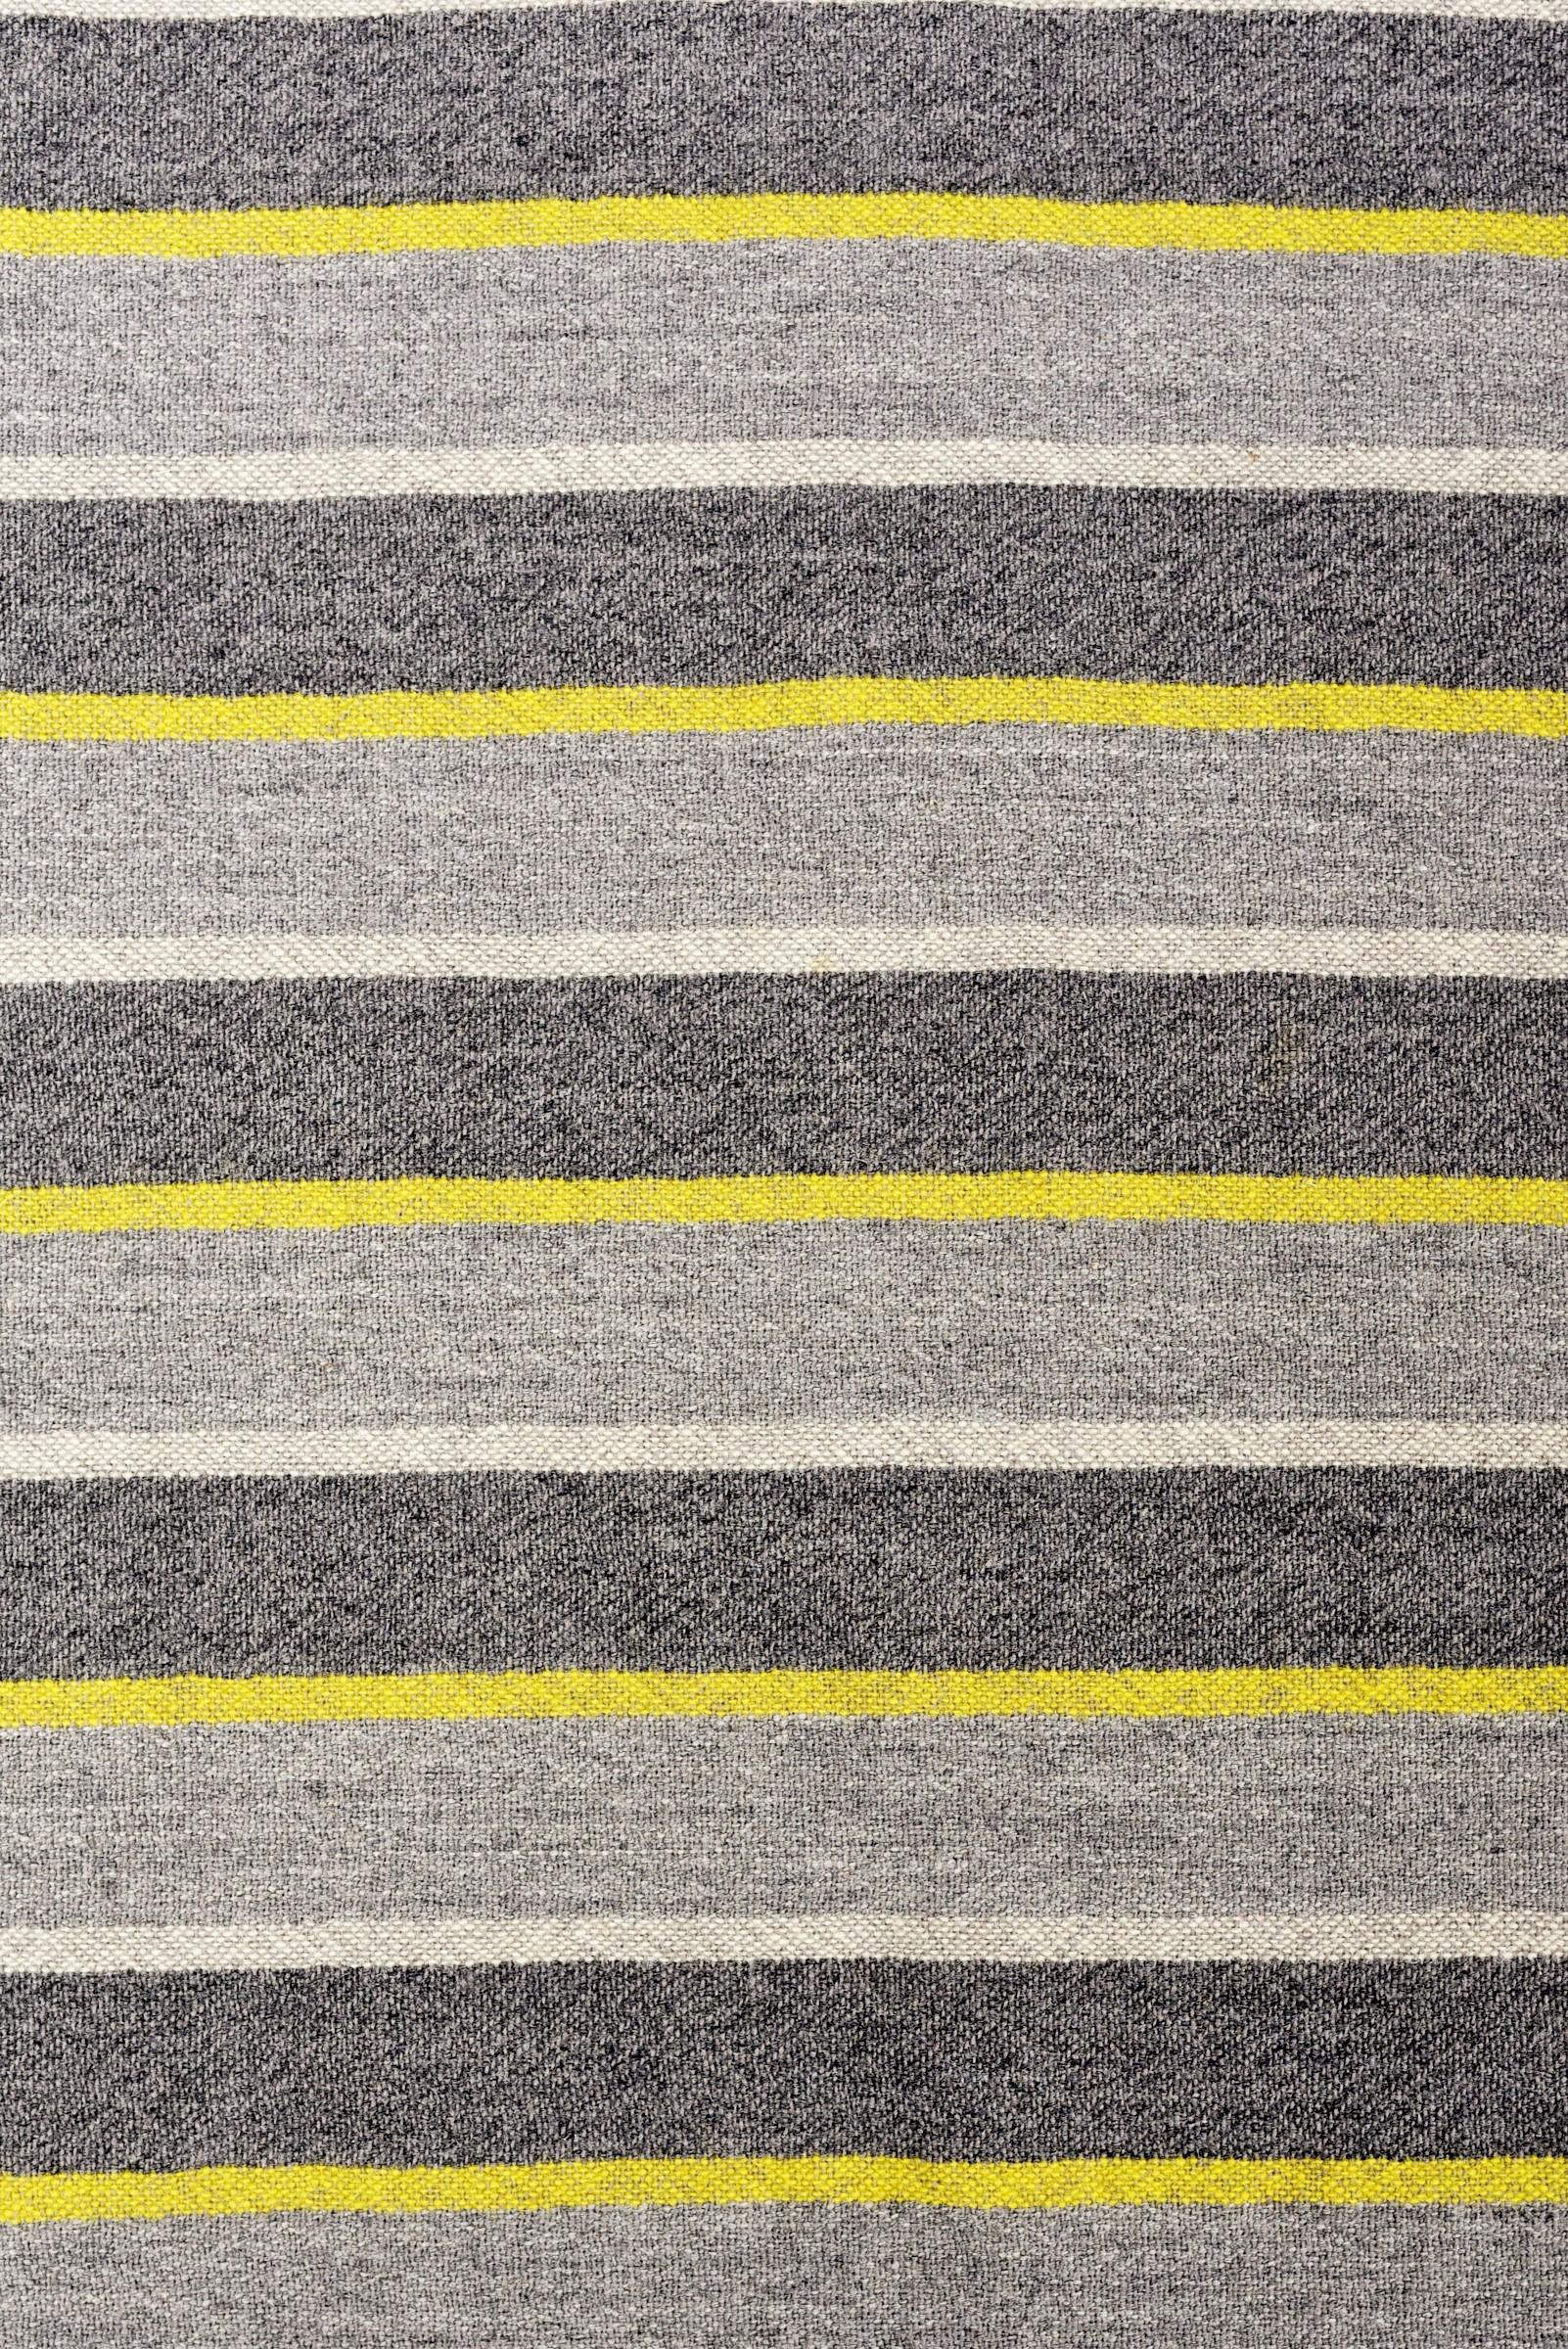 Grey and yellow striped wool day dress - France Circa 1945 For Sale 6